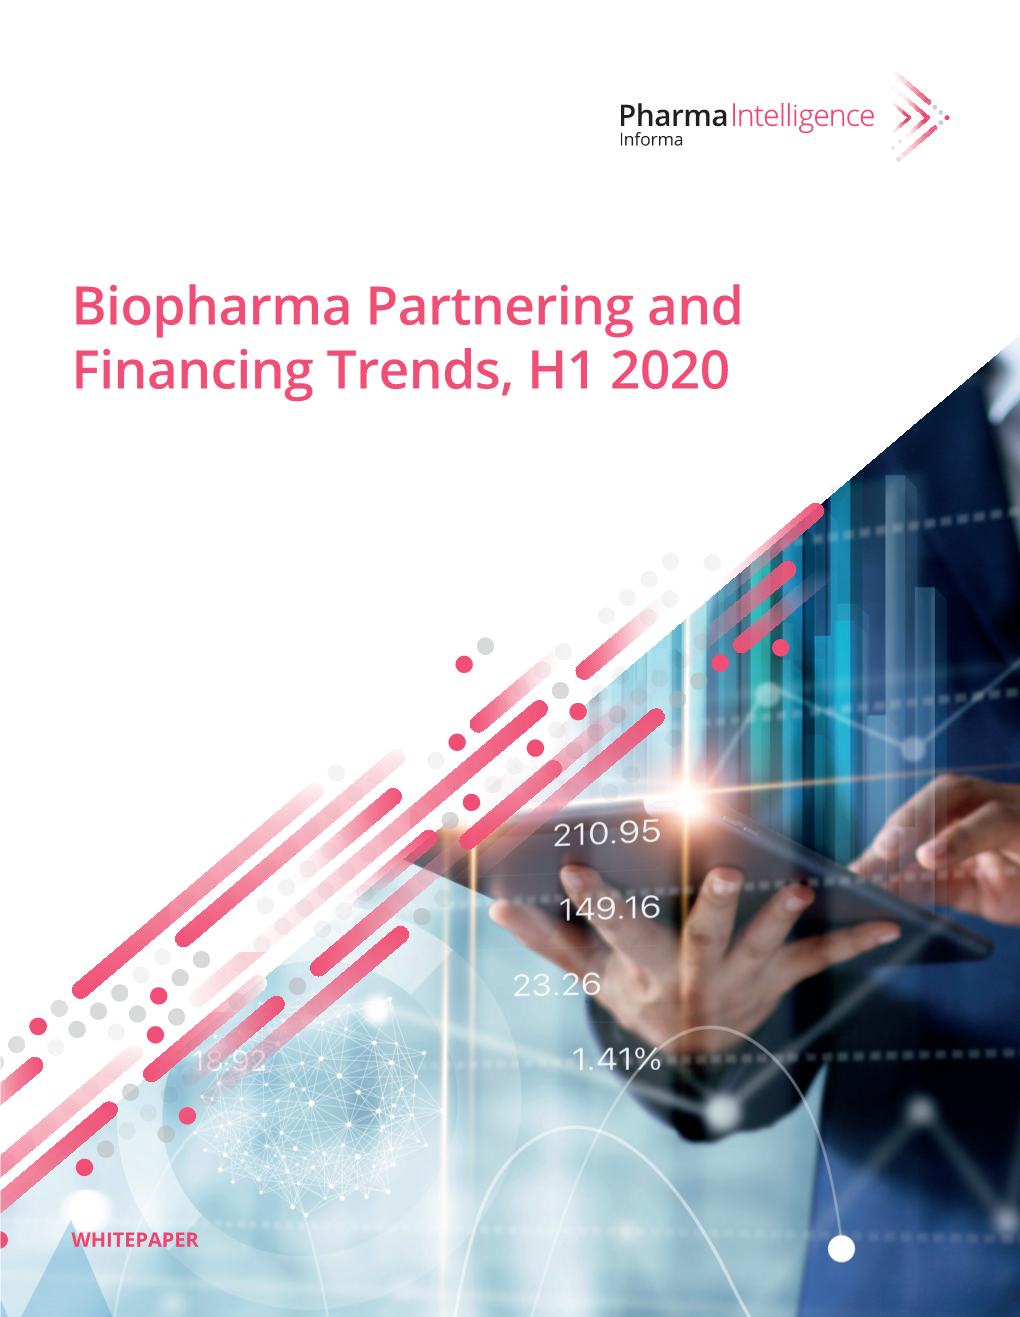 Biopharma Partnering and Financing Trends, H1 2020